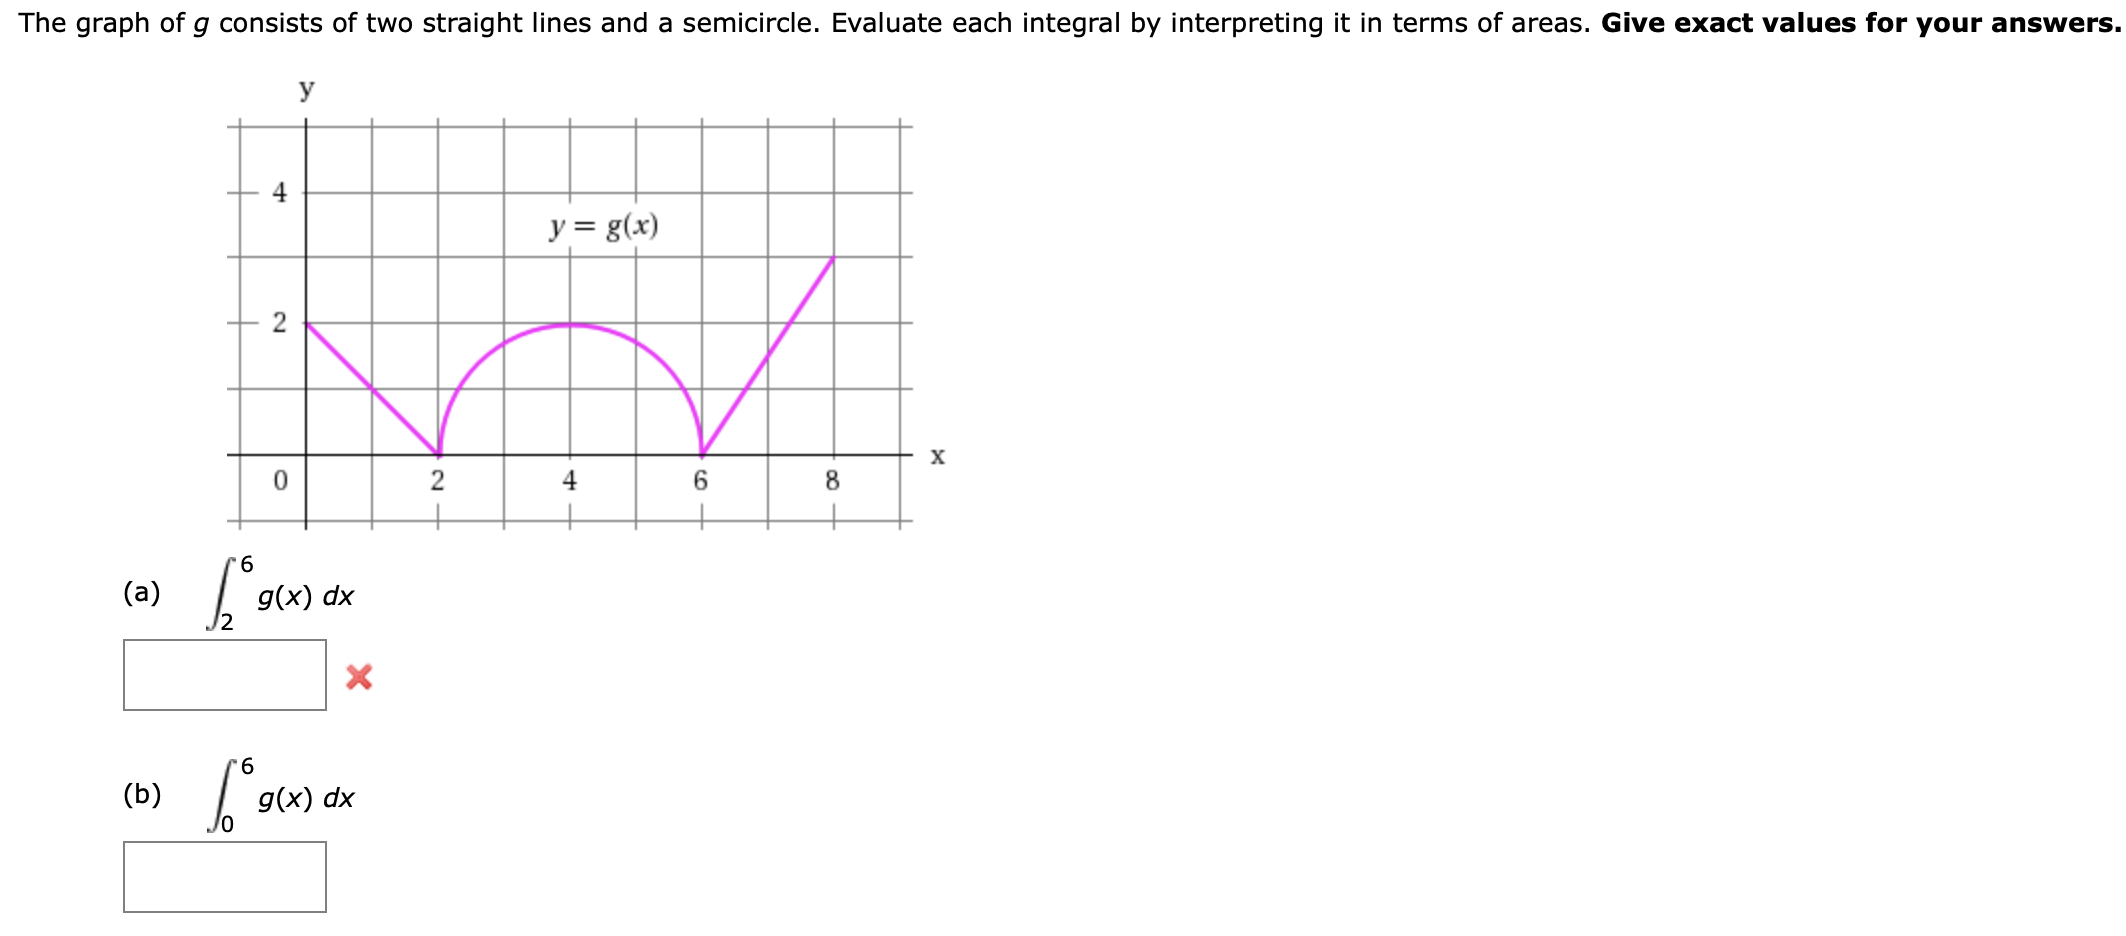 The graph of g consists of two straight lines and a semicircle. Evaluate each integral by interpreting it in terms of areas. Give exact values for your answers.
У
y = g(x)
х
2
4
6.
9.
(a)
g(x) dx
9.
(b)
g(x) dx
